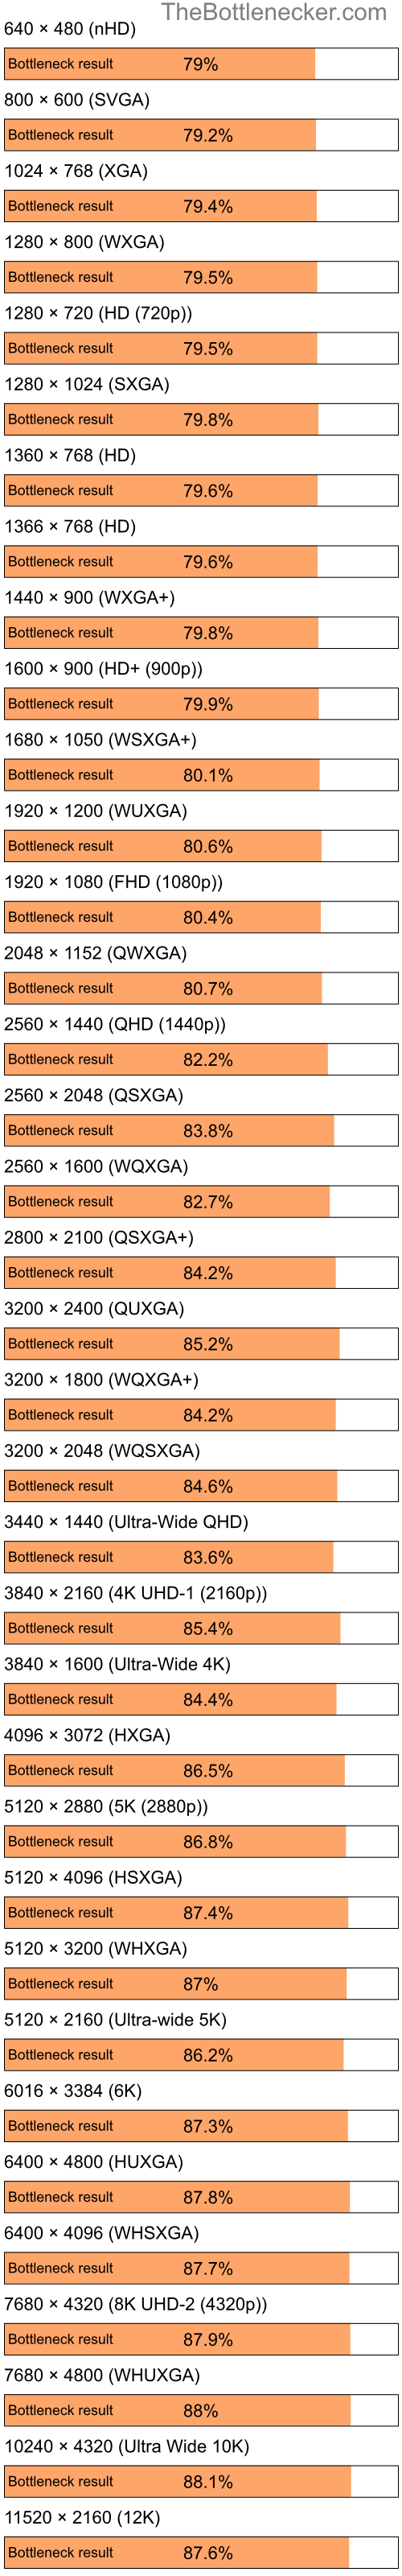 Bottleneck results by resolution for Intel Celeron and AMD Radeon X1250 in Graphic Card Intense Tasks